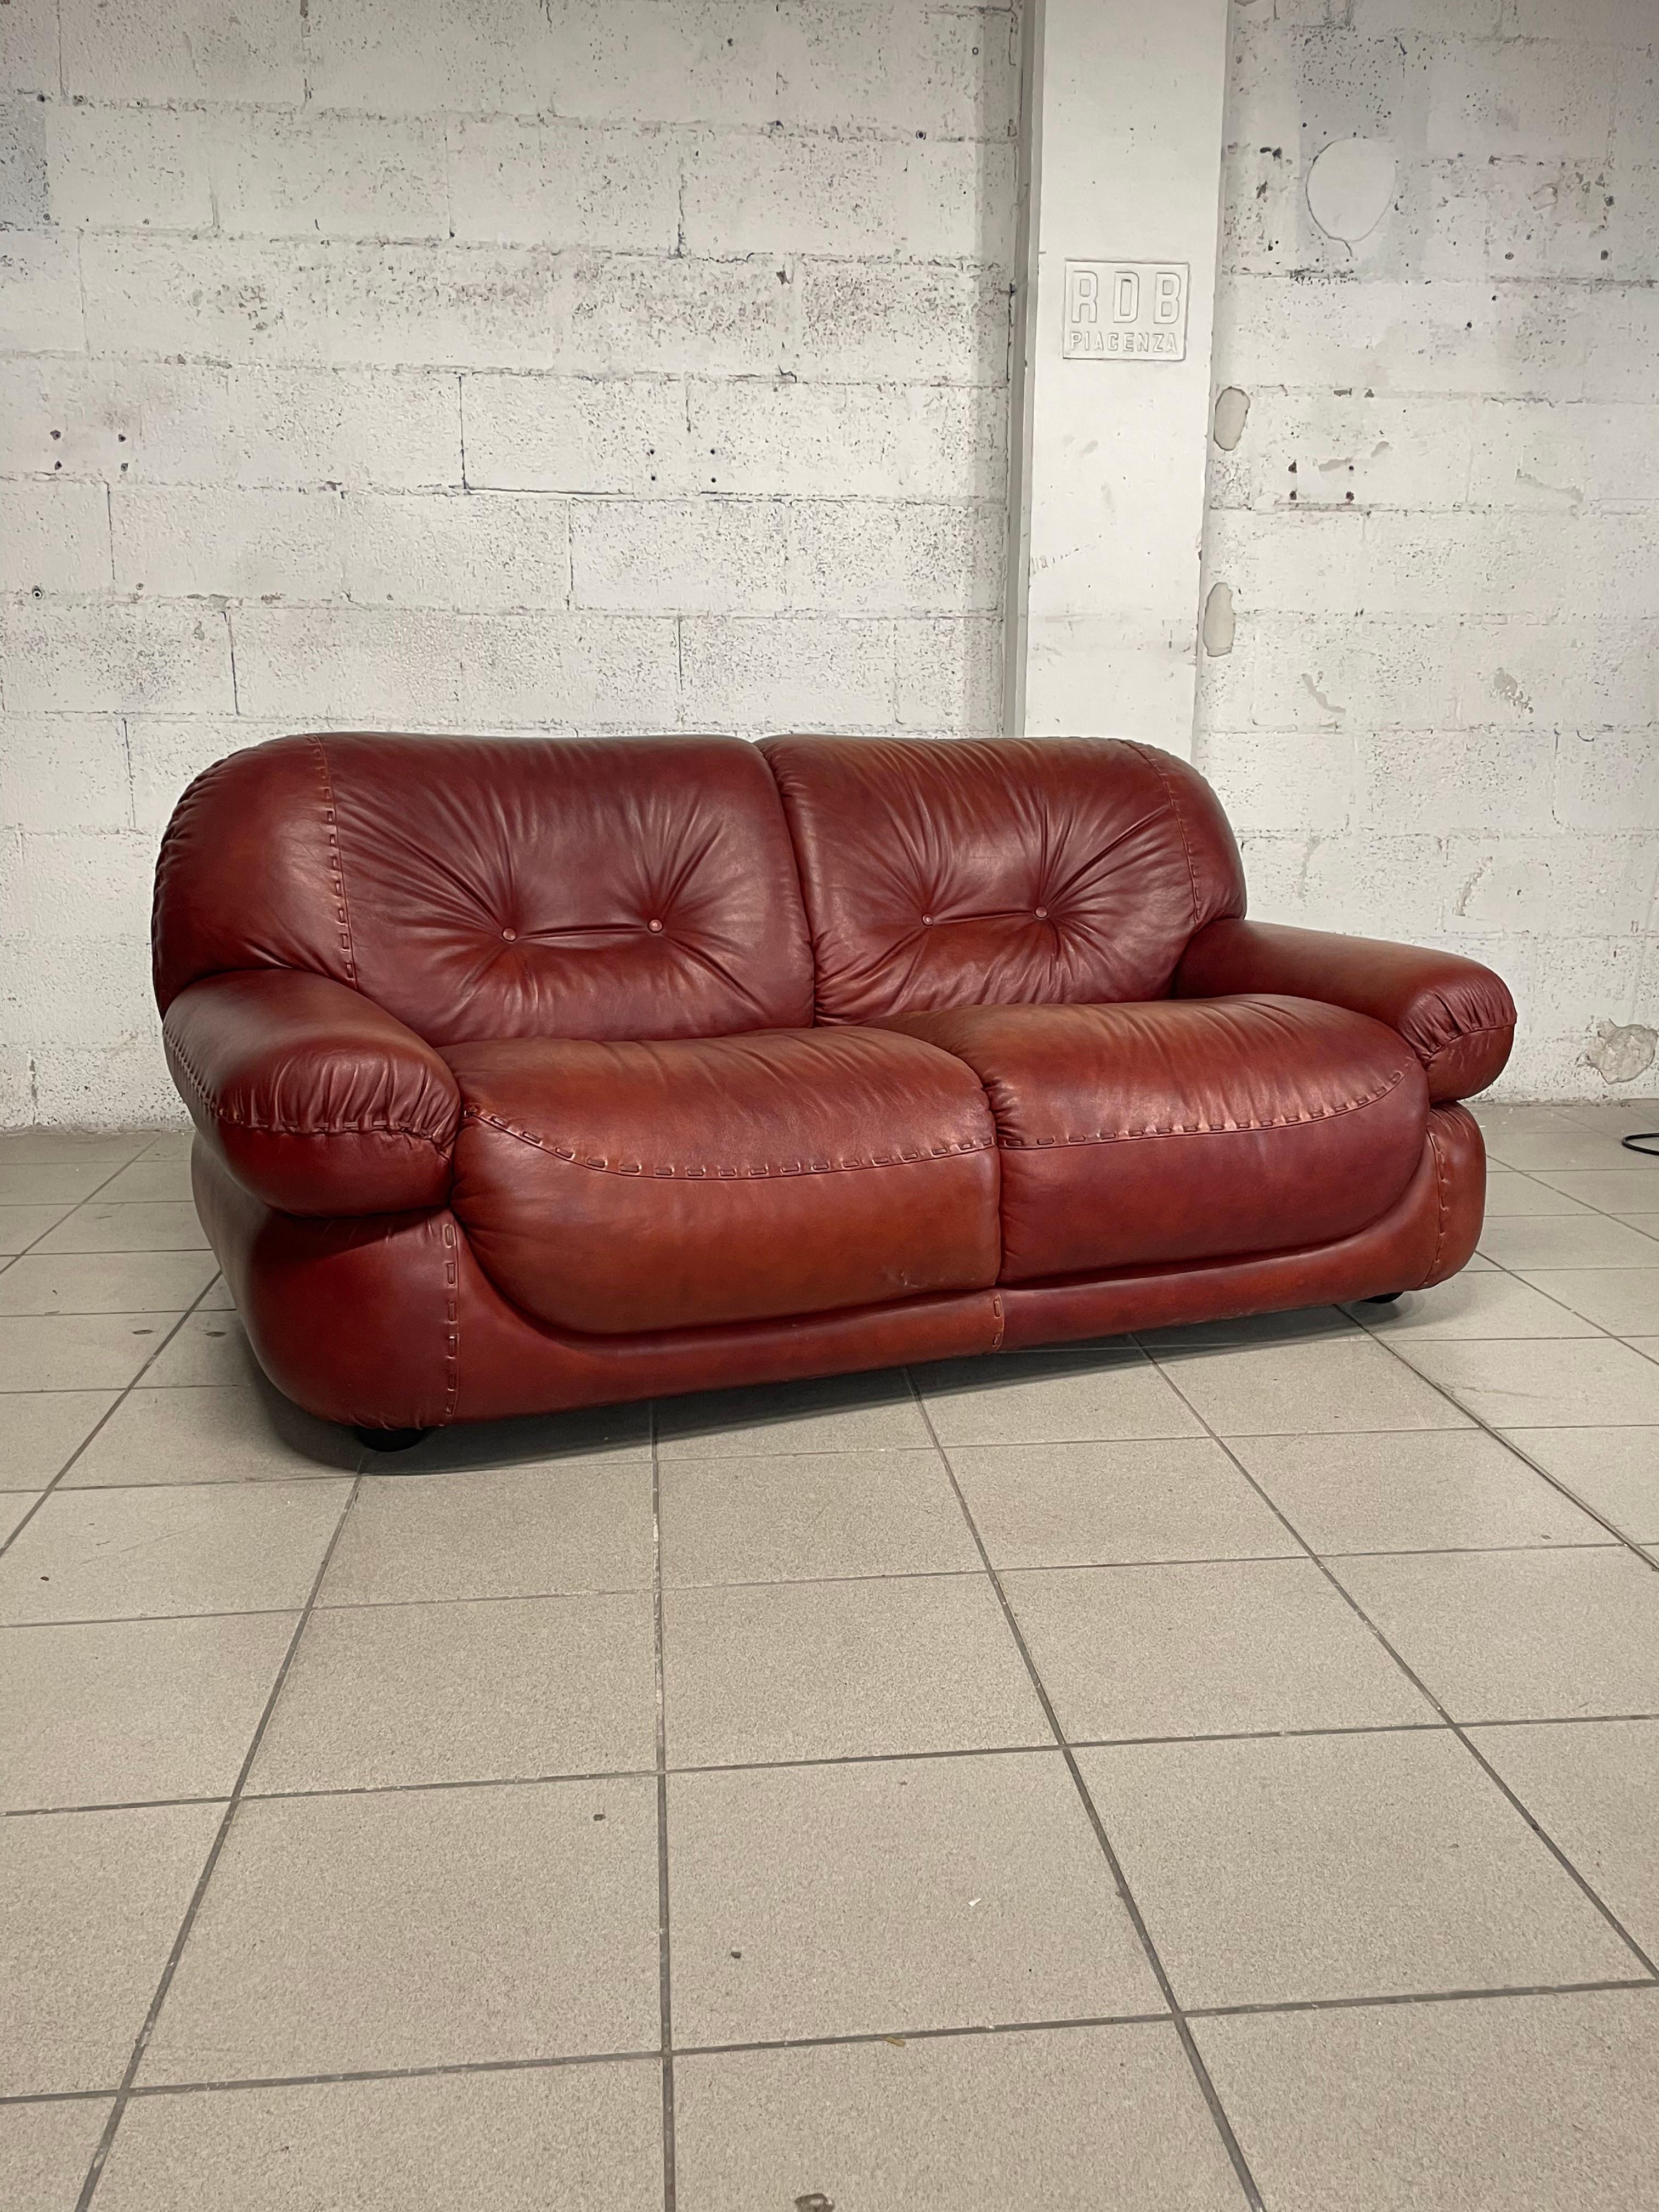 2-seater leather sofa mod. Sapporo by Mobil Girgi Italia, 1970s For Sale 10